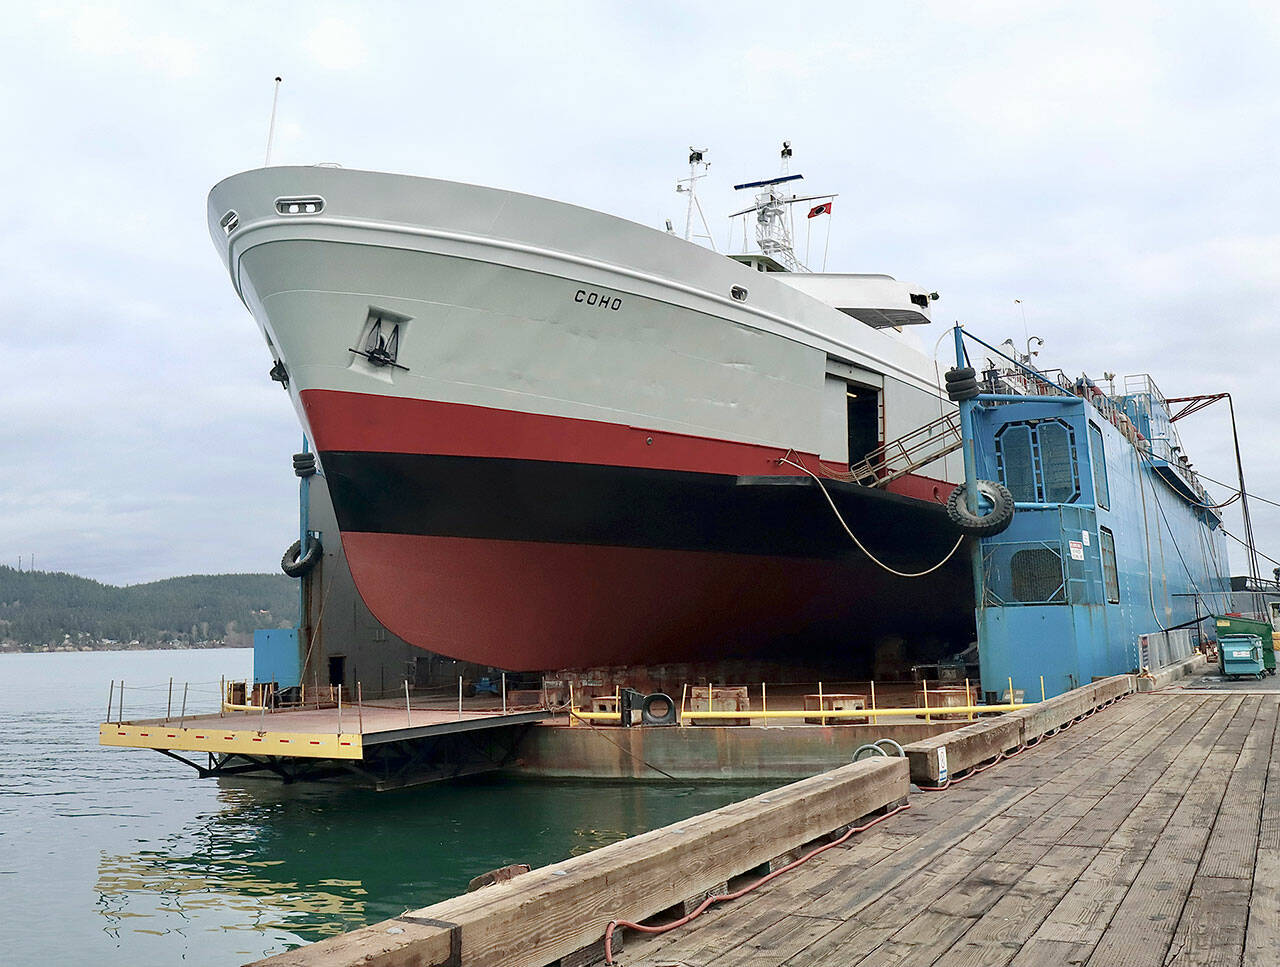 The MV Coho, pictured in dry dock at the Anacortes Ship Yards, will be back in service Thursday. Yearly maintenance began Jan. 3. The maintenance is taking a few days longer due to COVID-19 the past two years, Black Ball Ferry Line officials have said. The ship returns to twice-daily round trips across the Strait of Juan de Fuca between Victoria and Port Angeles at 8:20 a.m. Thursday. (Dave Logan/for Peninsula Daily News)